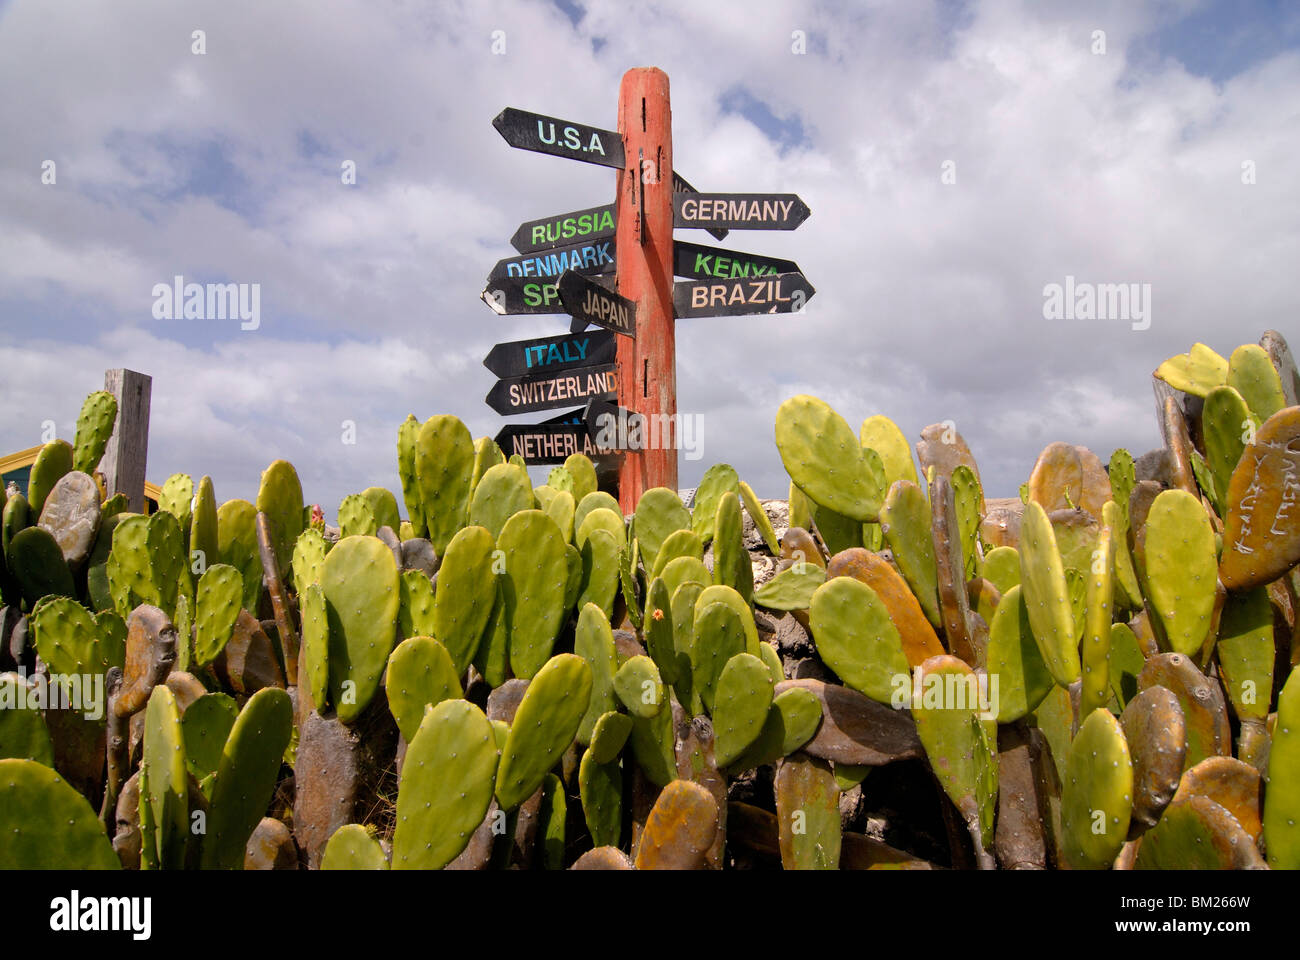 A signpost standing among cactuses, Barbados, West Indies, Caribbean, Central America Stock Photo